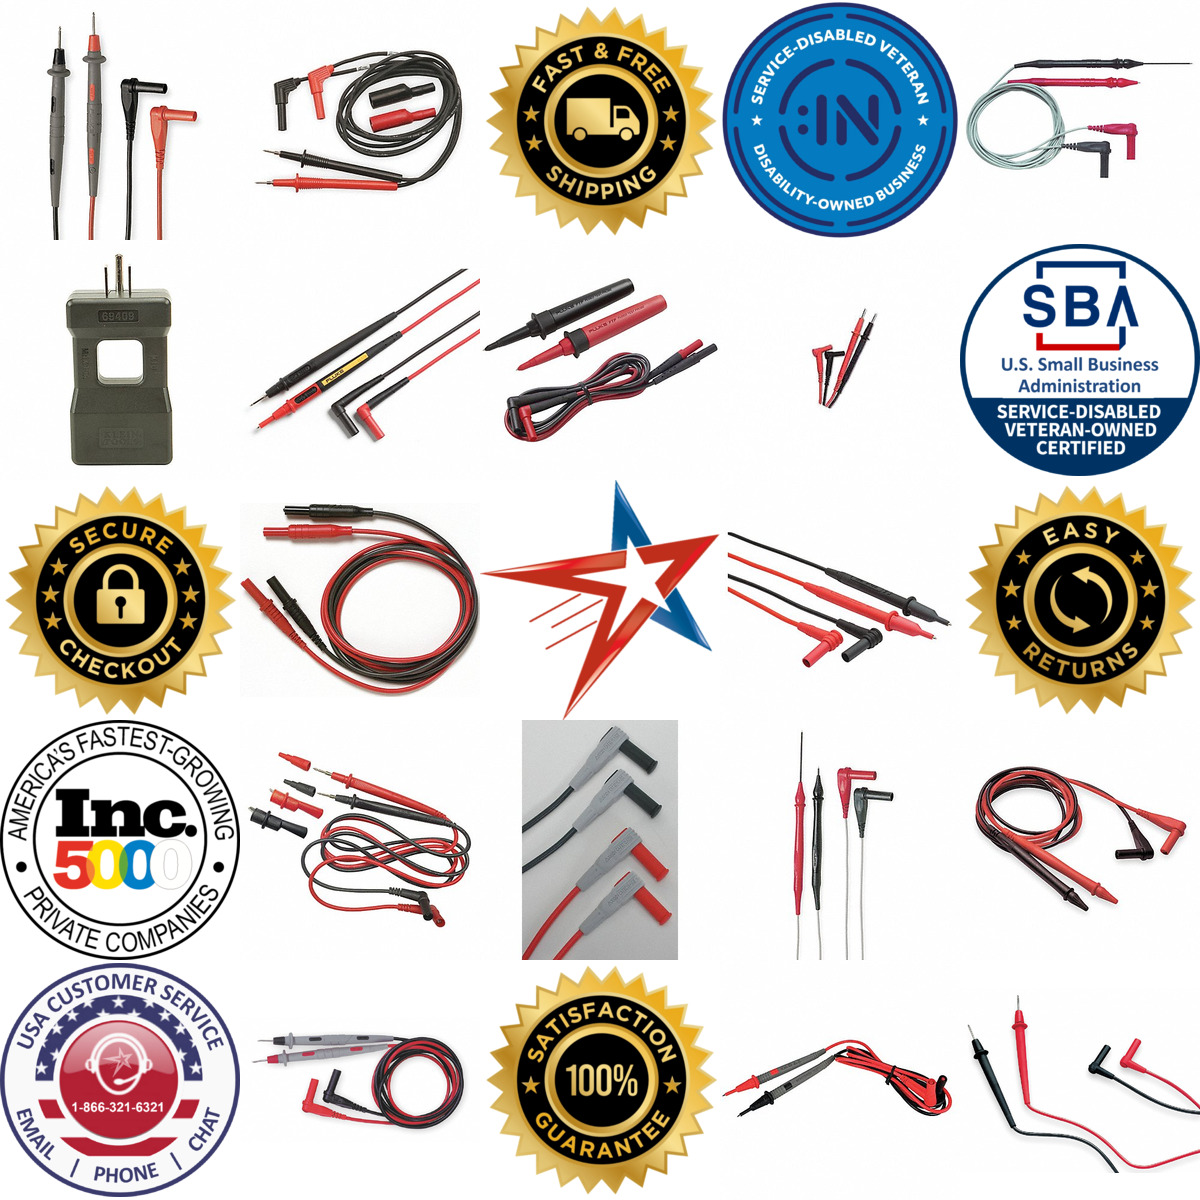 A selection of Test Leads products on GoVets